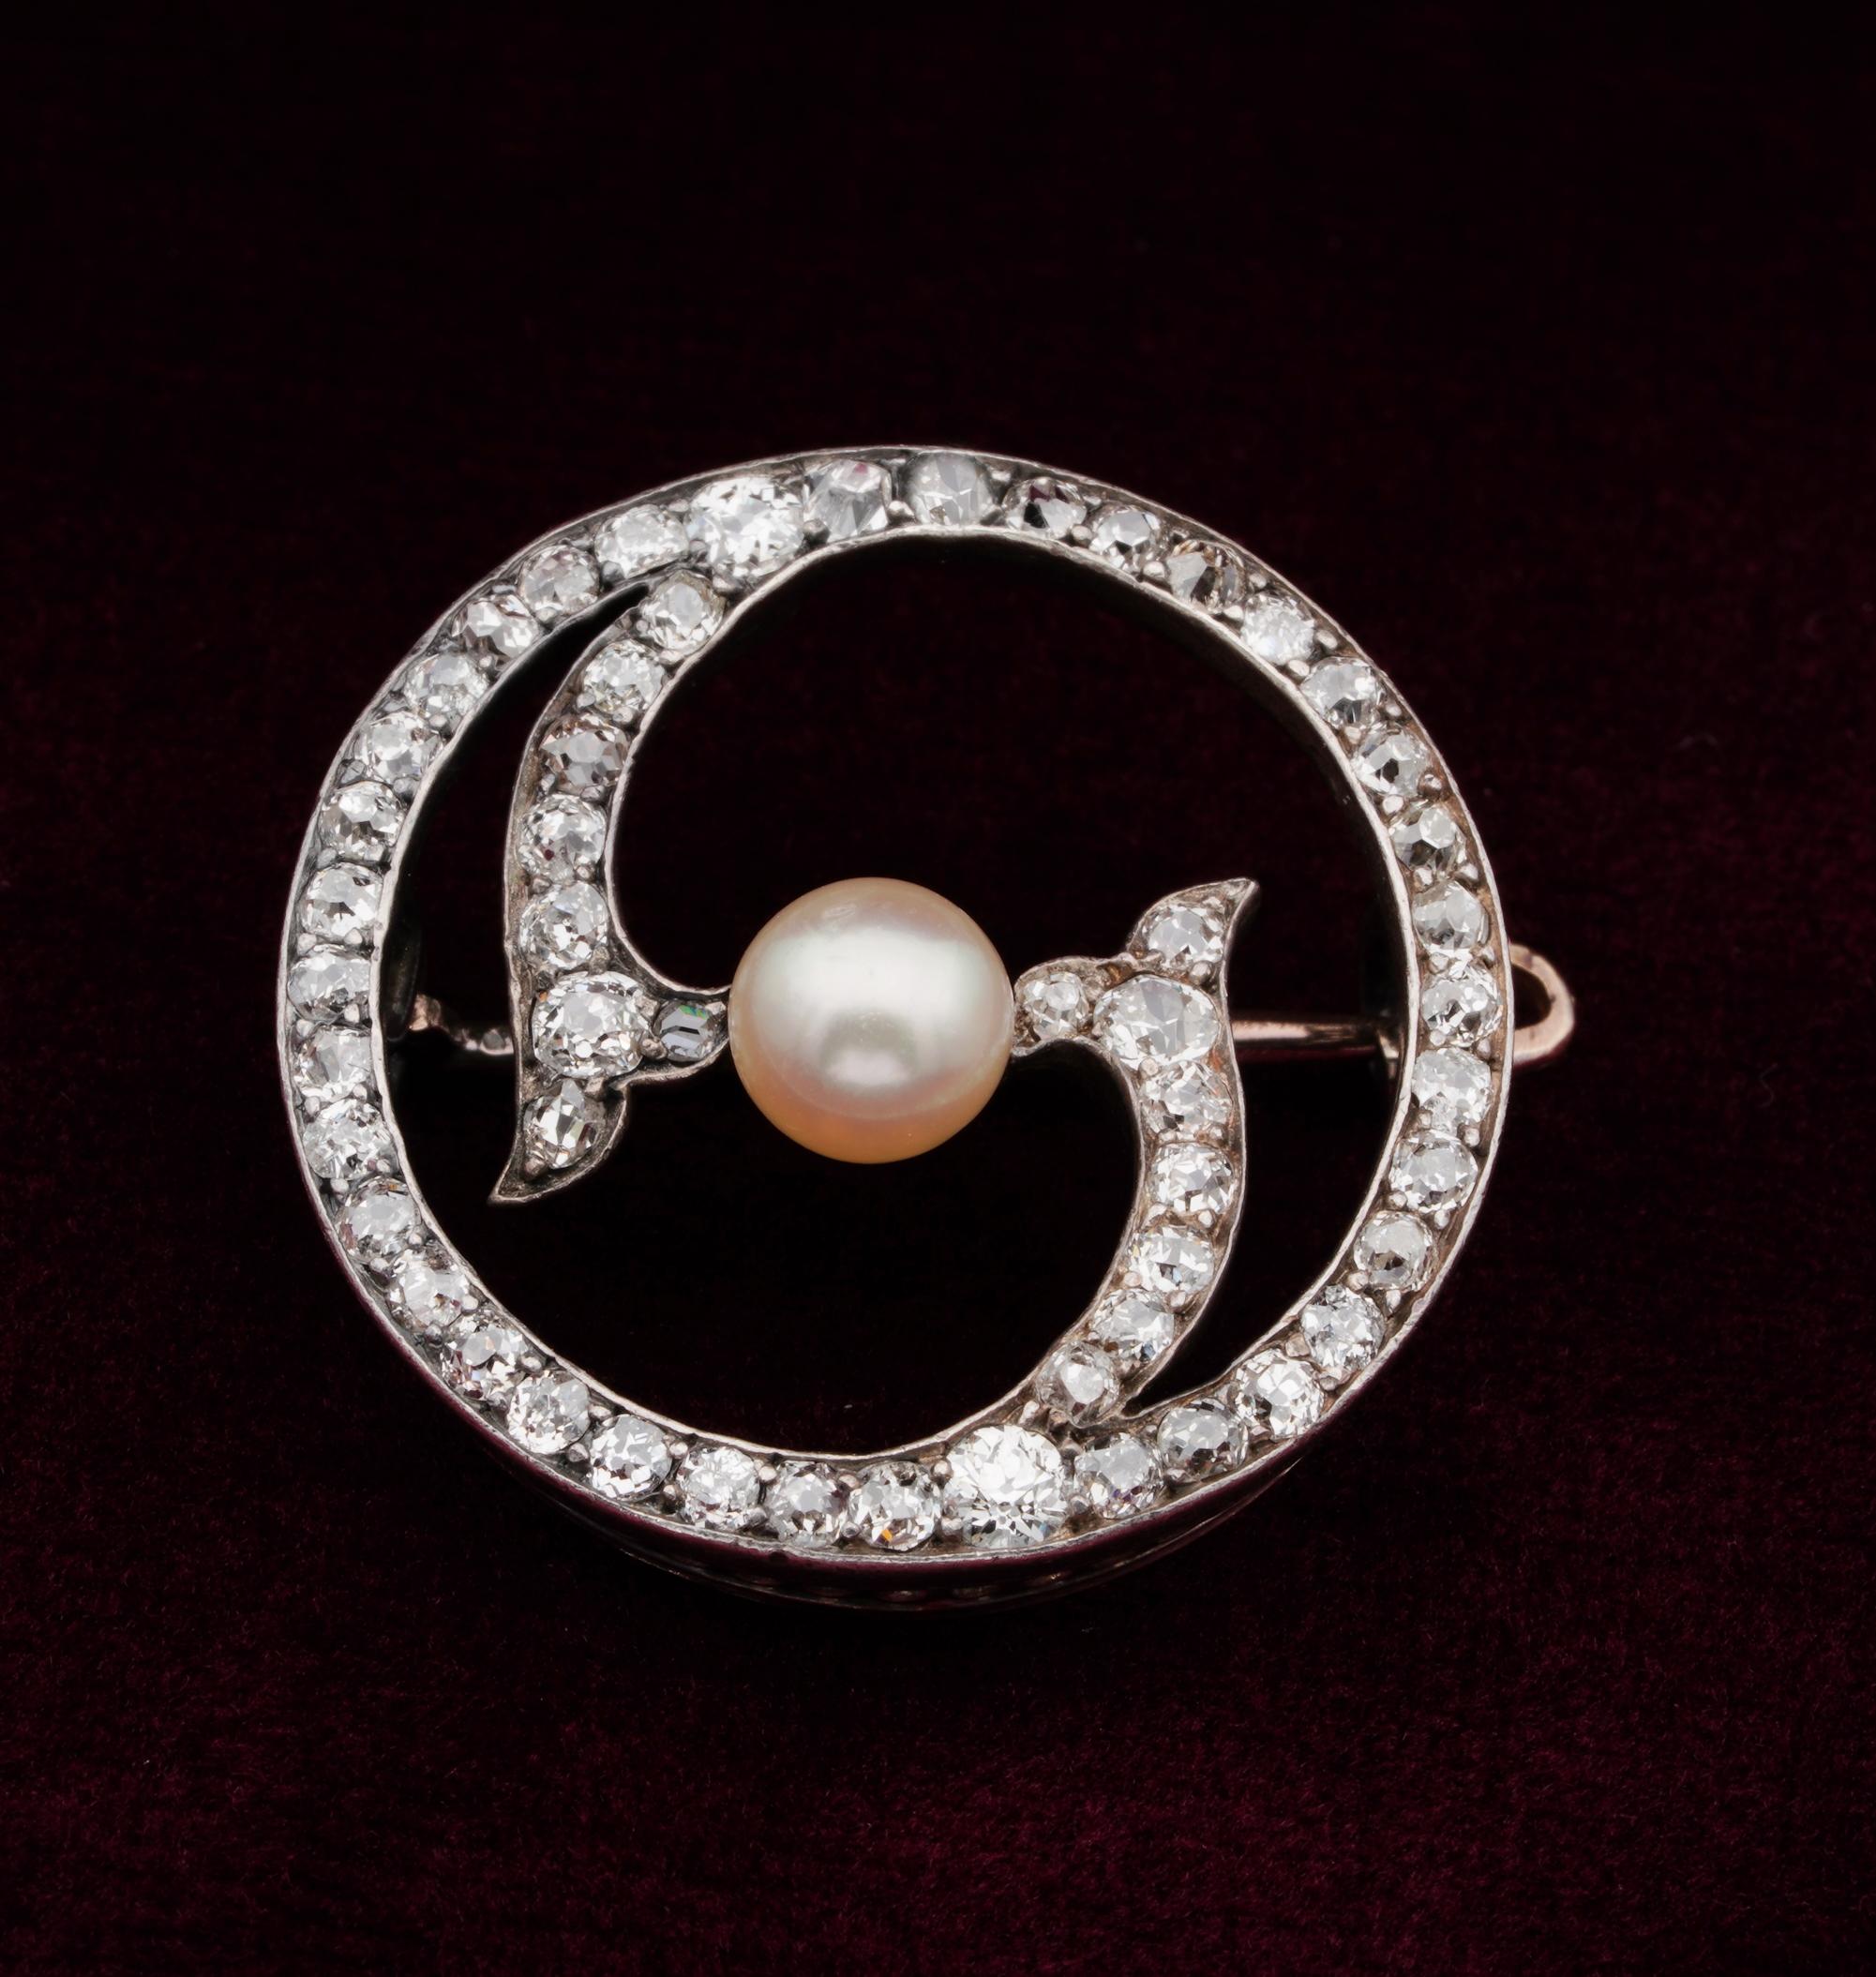 Epitome of Elegance

Antique Victorian period, elegant circle designed brooch or pendant can be worn both ways
1880 ca – hand crafted of the most exquisite workmanship of solid 18 Kt gold silver – not marked as the majority of antiques
Delightful